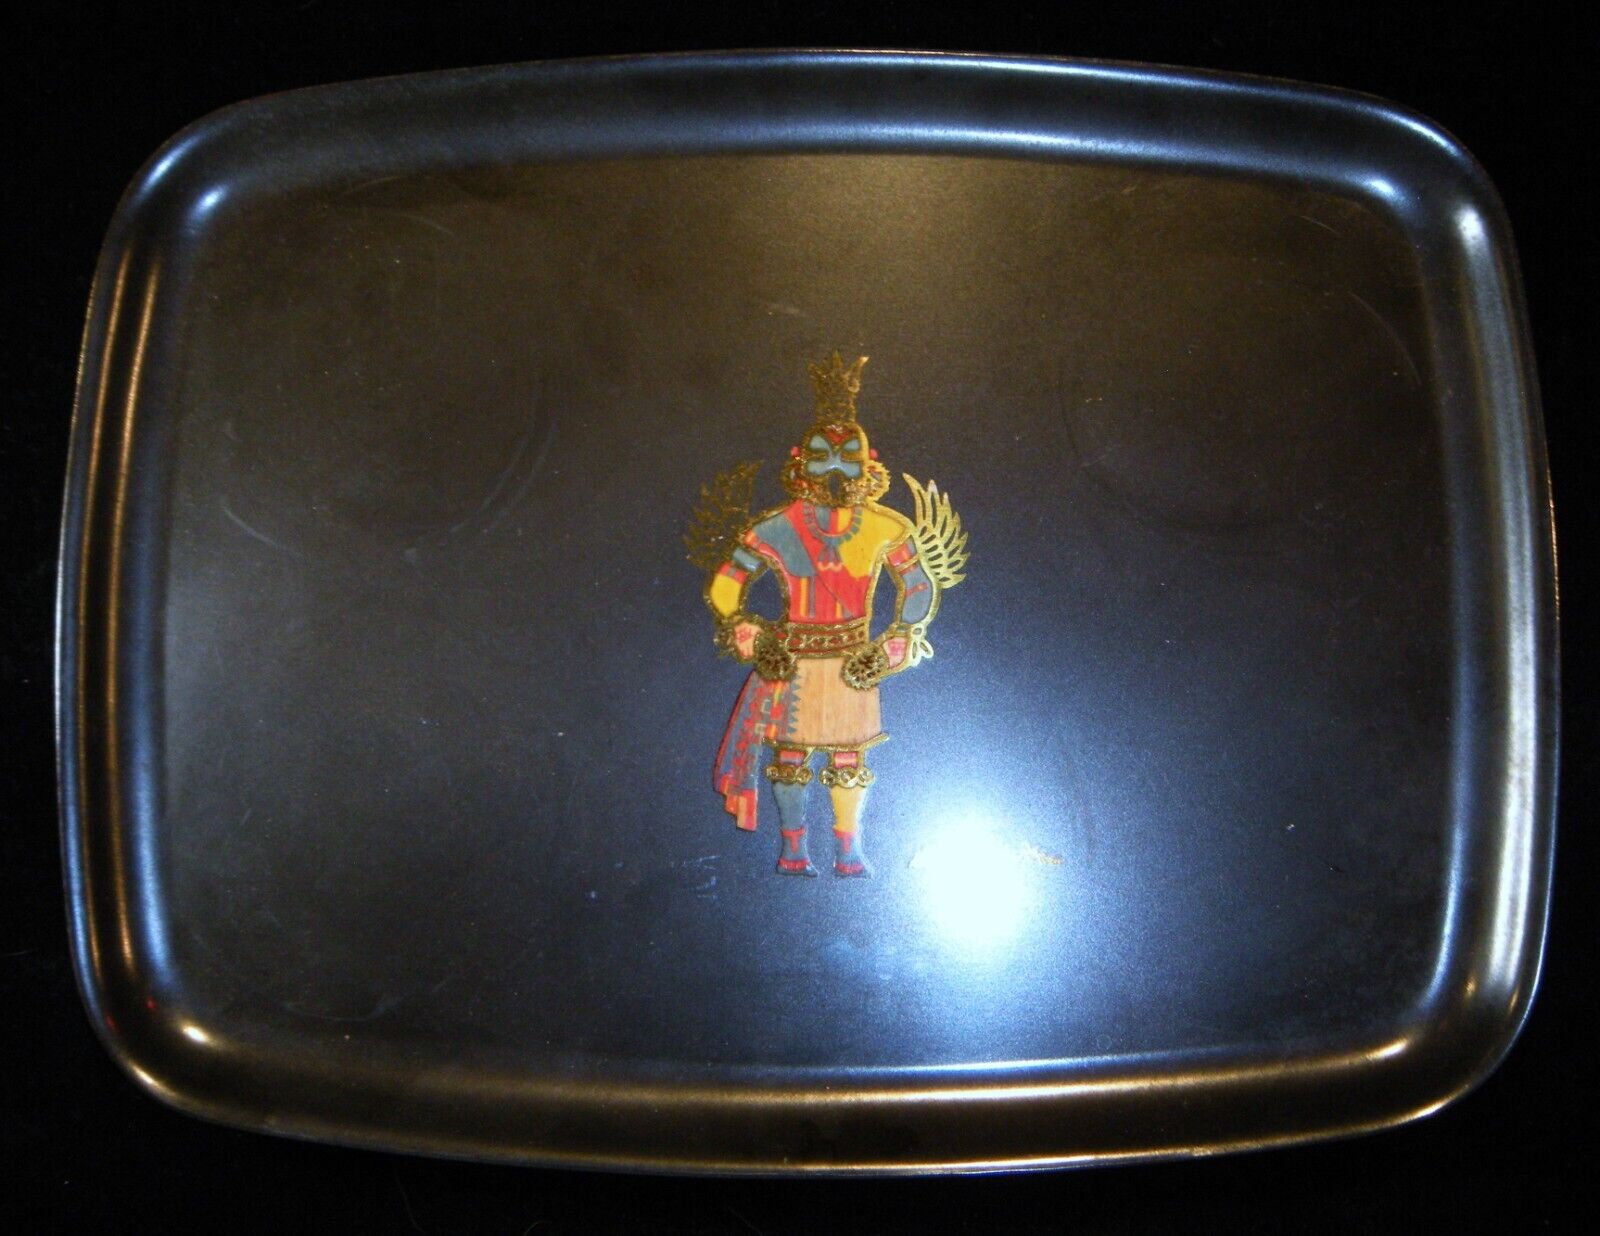 Vintage Couroc Kachina Serving Trays. Two sizes are available